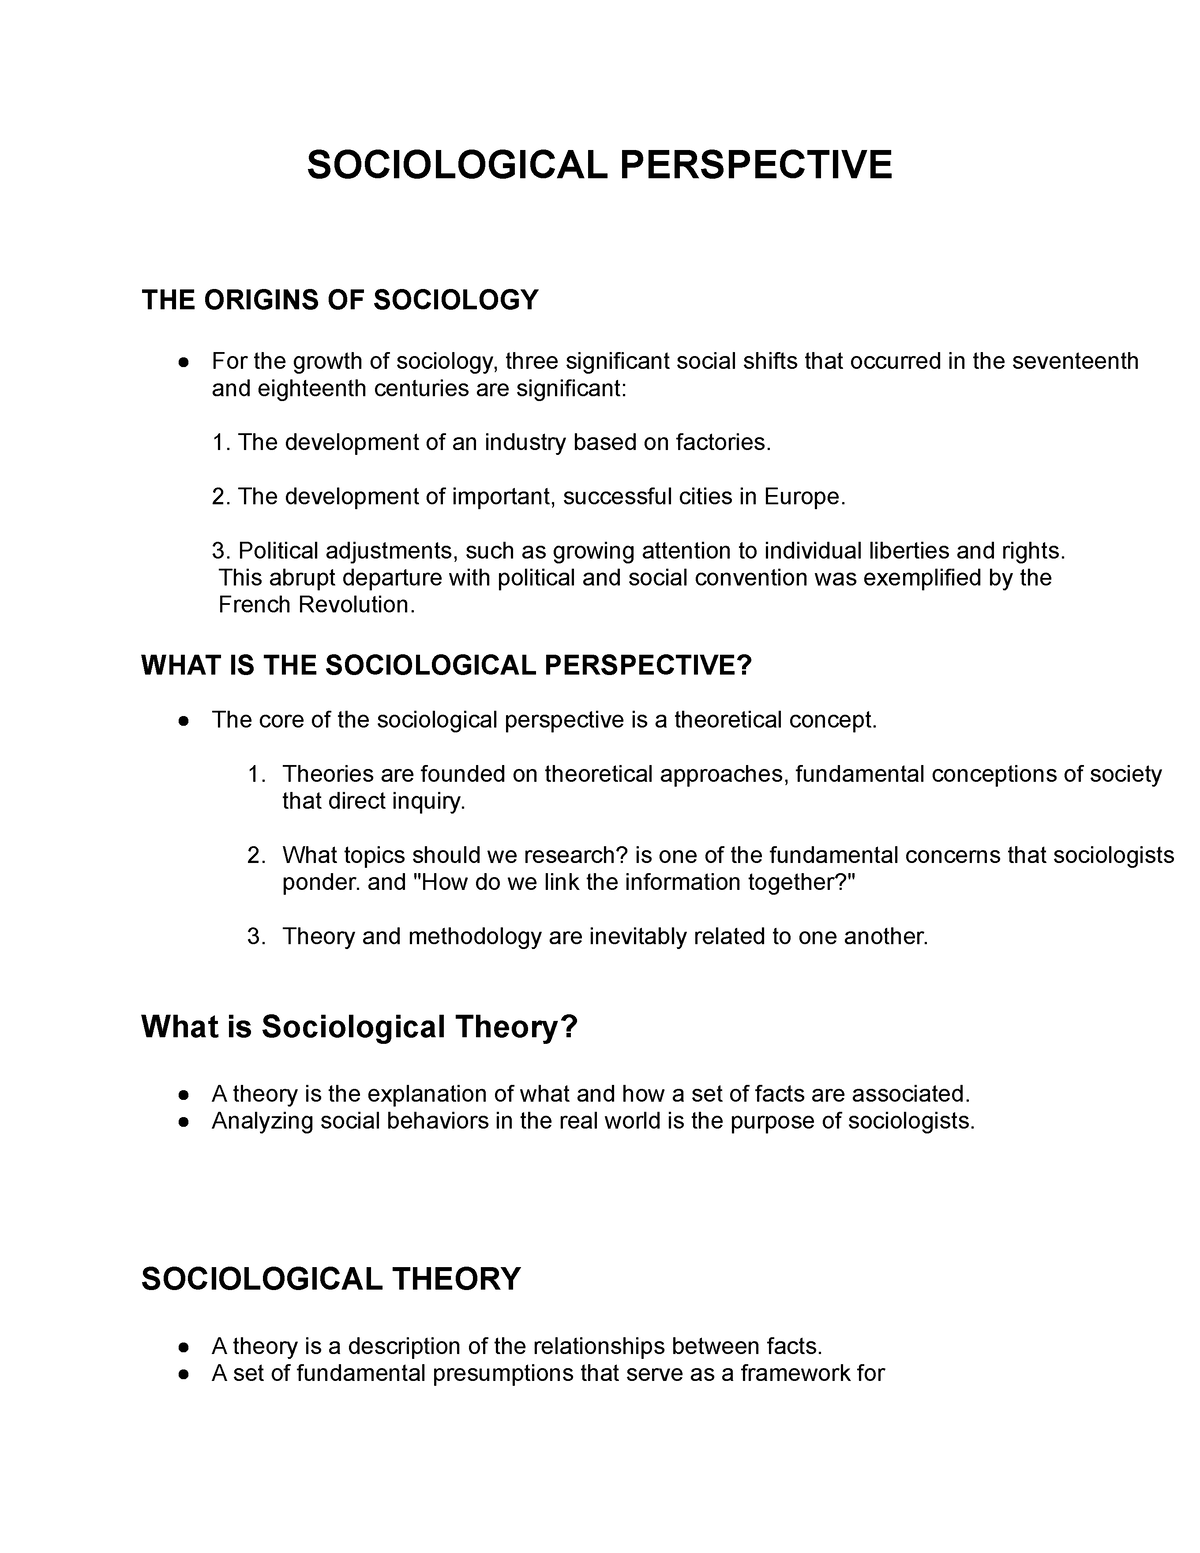 Unit 1 Sociological Perspective Sociological Perspective The Origins Of Sociology For The